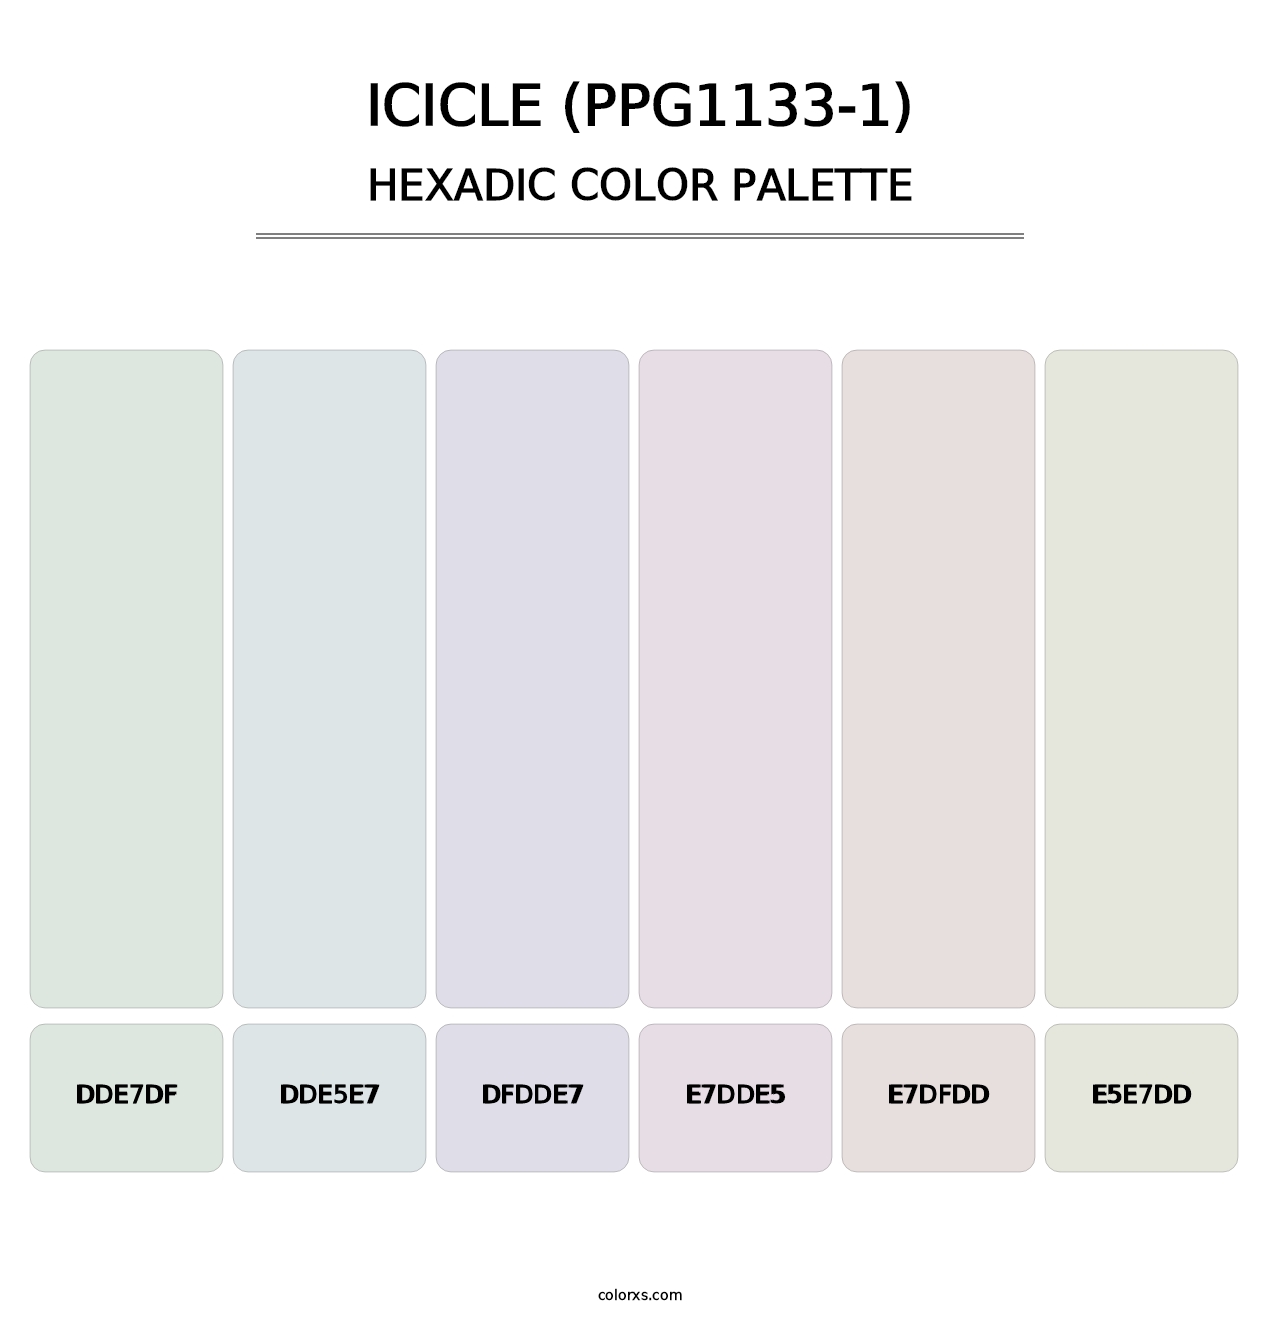 Icicle (PPG1133-1) - Hexadic Color Palette